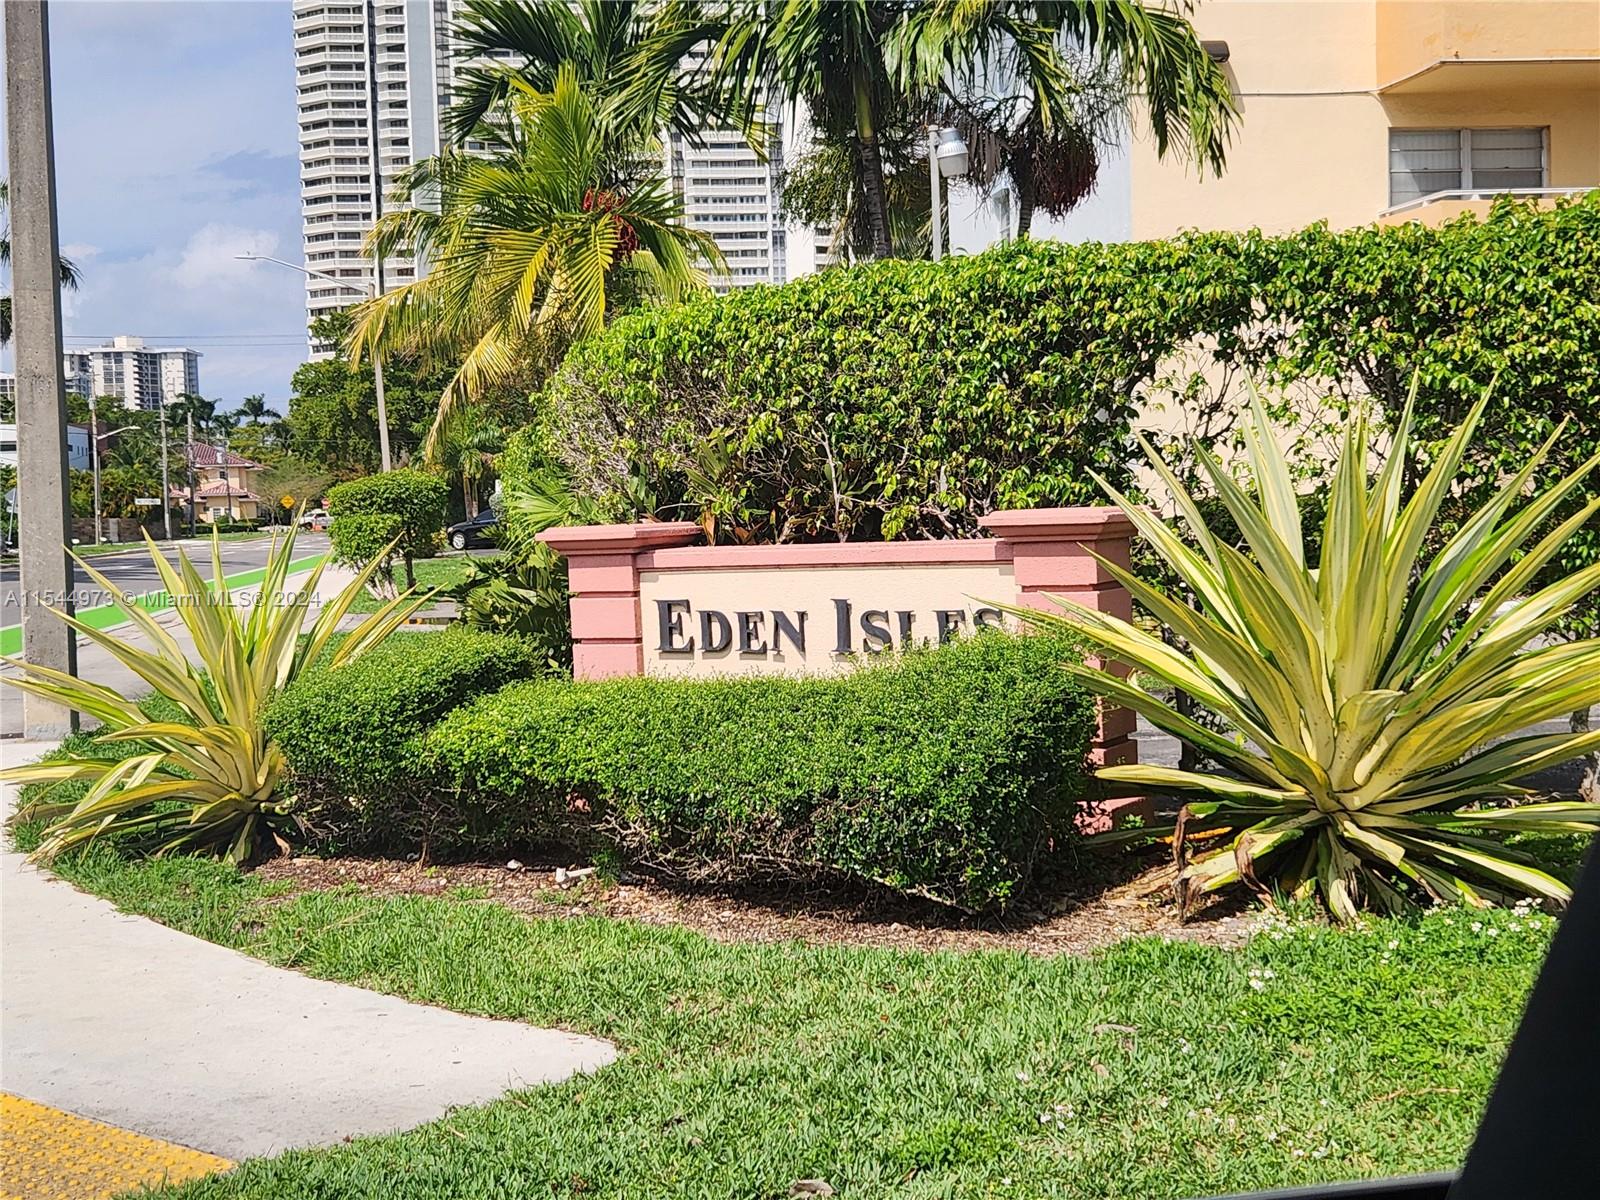 a view of a sign in a yard with palm trees